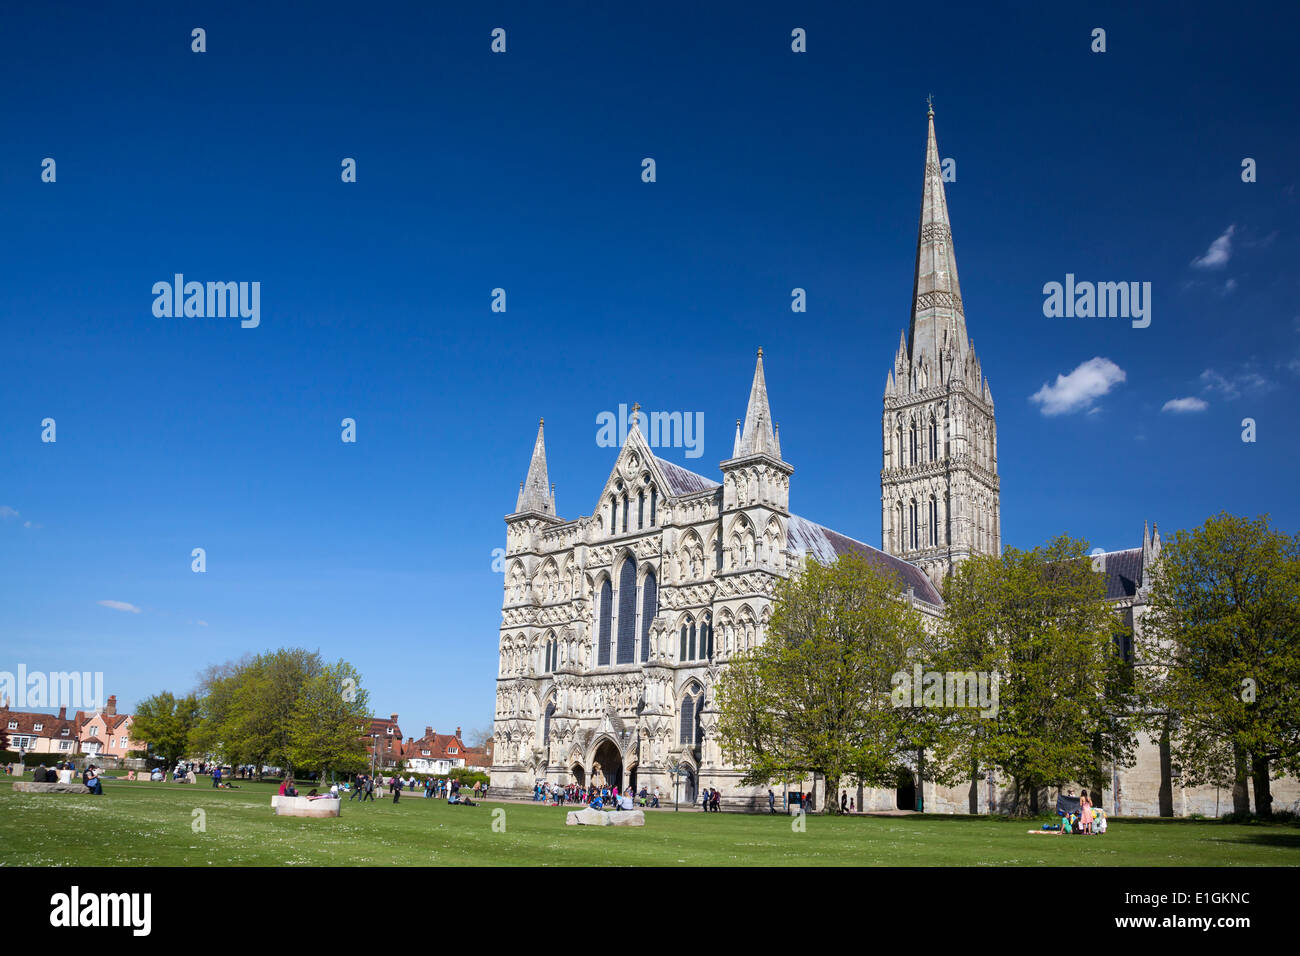 Early English Gothic style Salisbury Cathedral with the talest spire in the country. Wiltshire England UK Europe Stock Photo